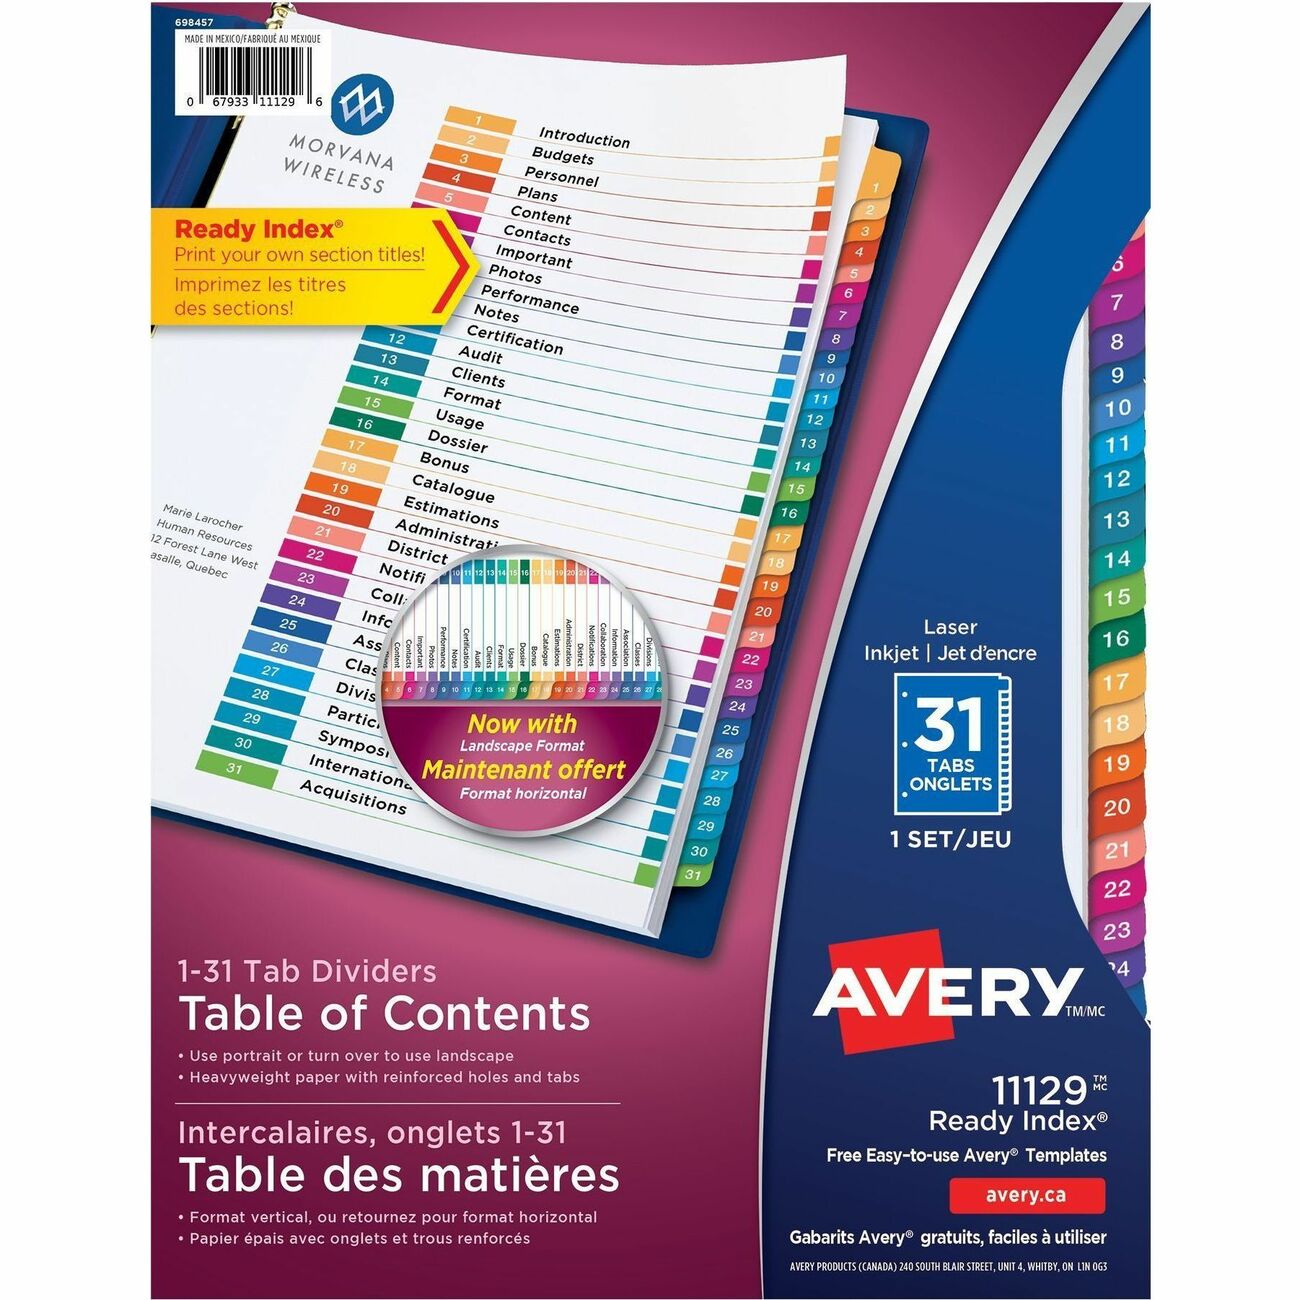 Avery Dennison Ave-11129 Ready Index Table Of Contents Reference for sale online 